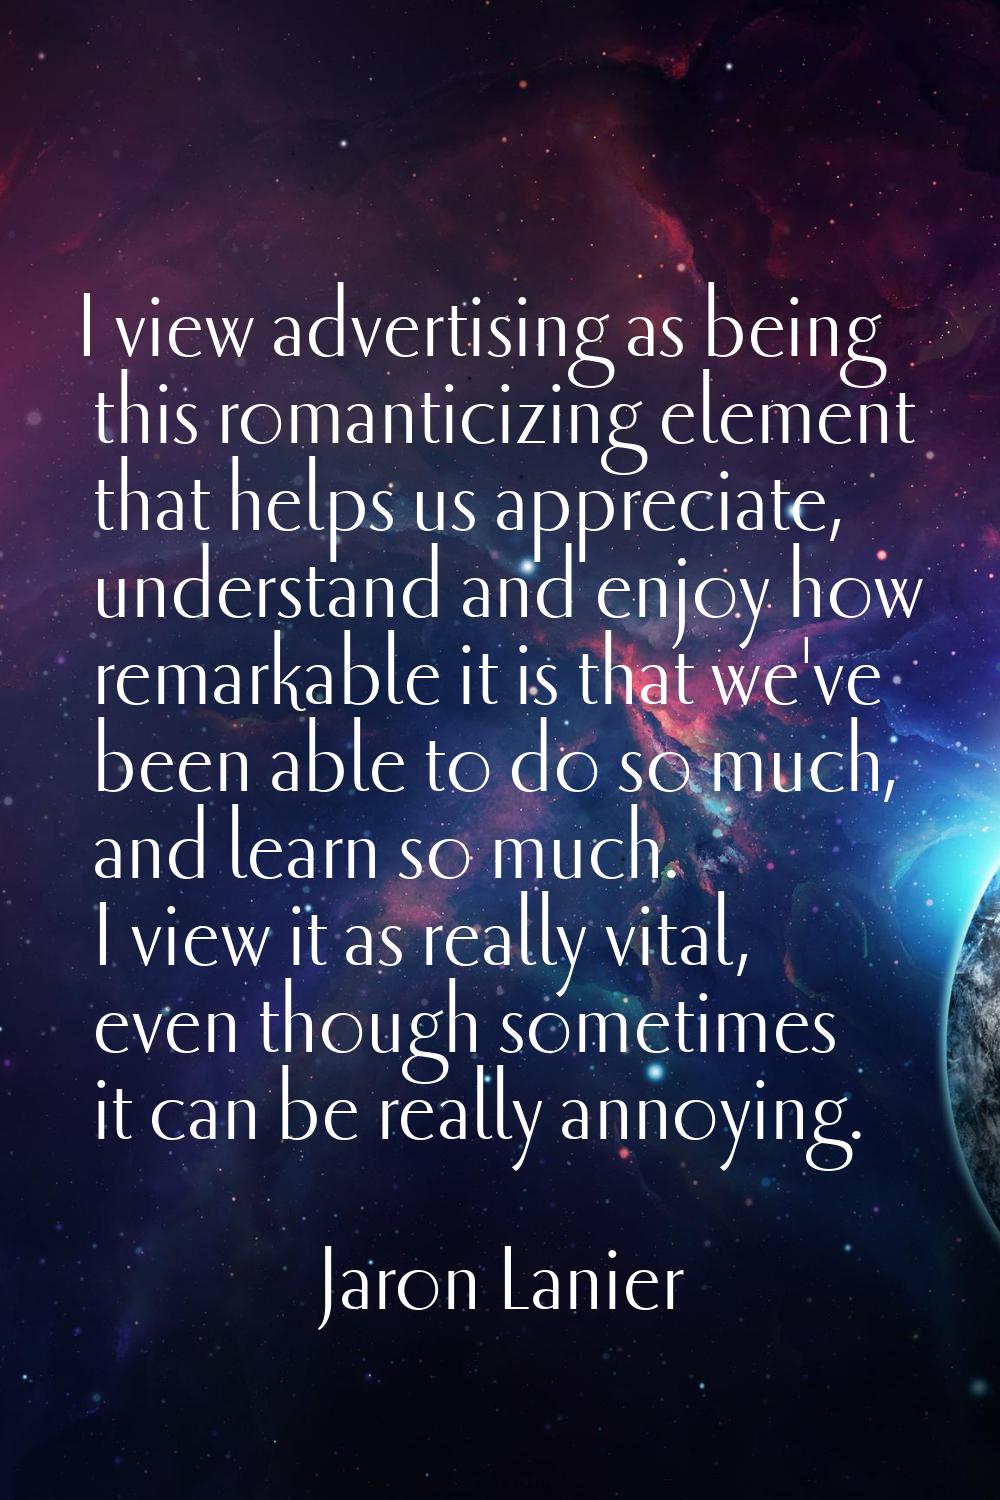 I view advertising as being this romanticizing element that helps us appreciate, understand and enj